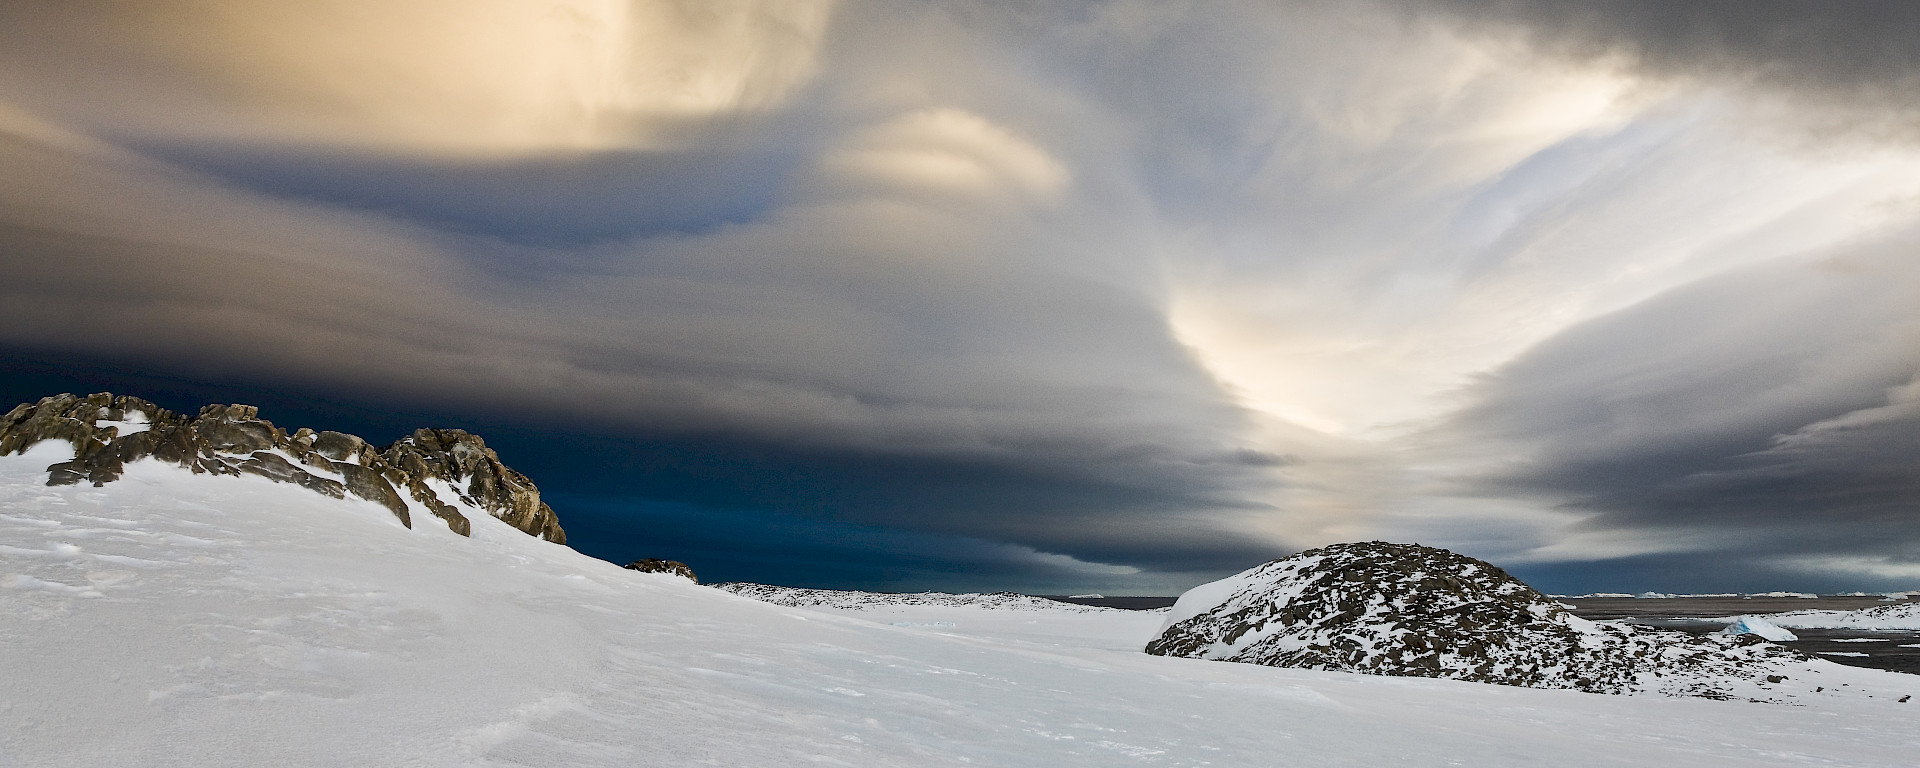 Clouds above an icy landscape.